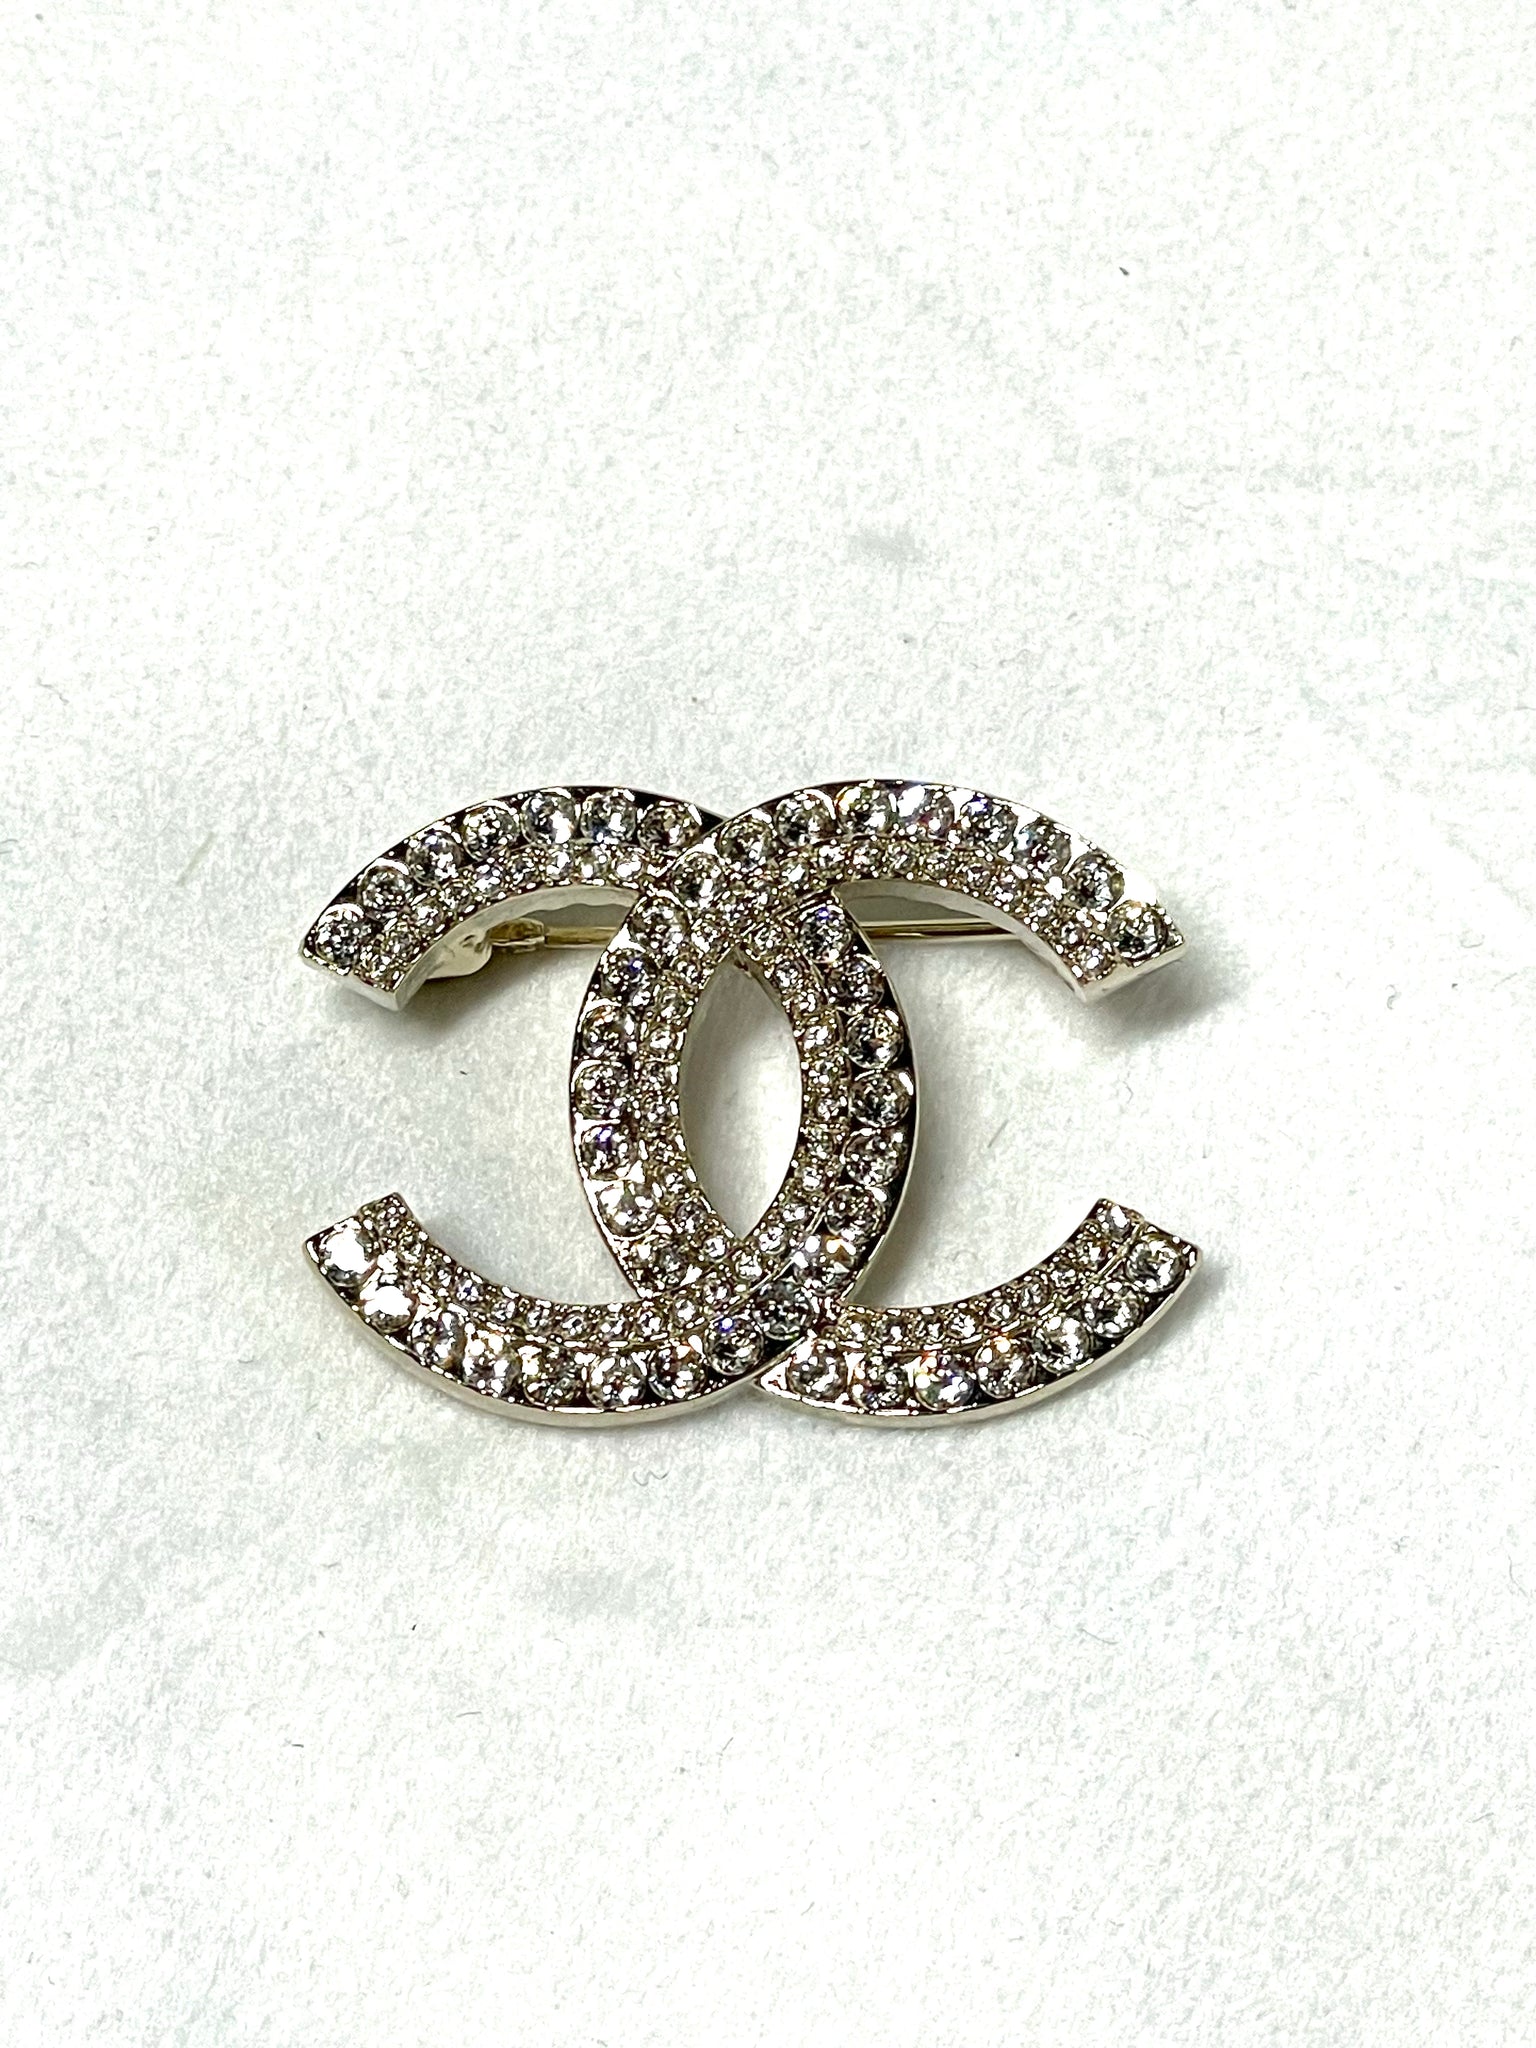 Pre Loved Chanel Crystal Brooch *brand new* from UniKoncept in Waterloo